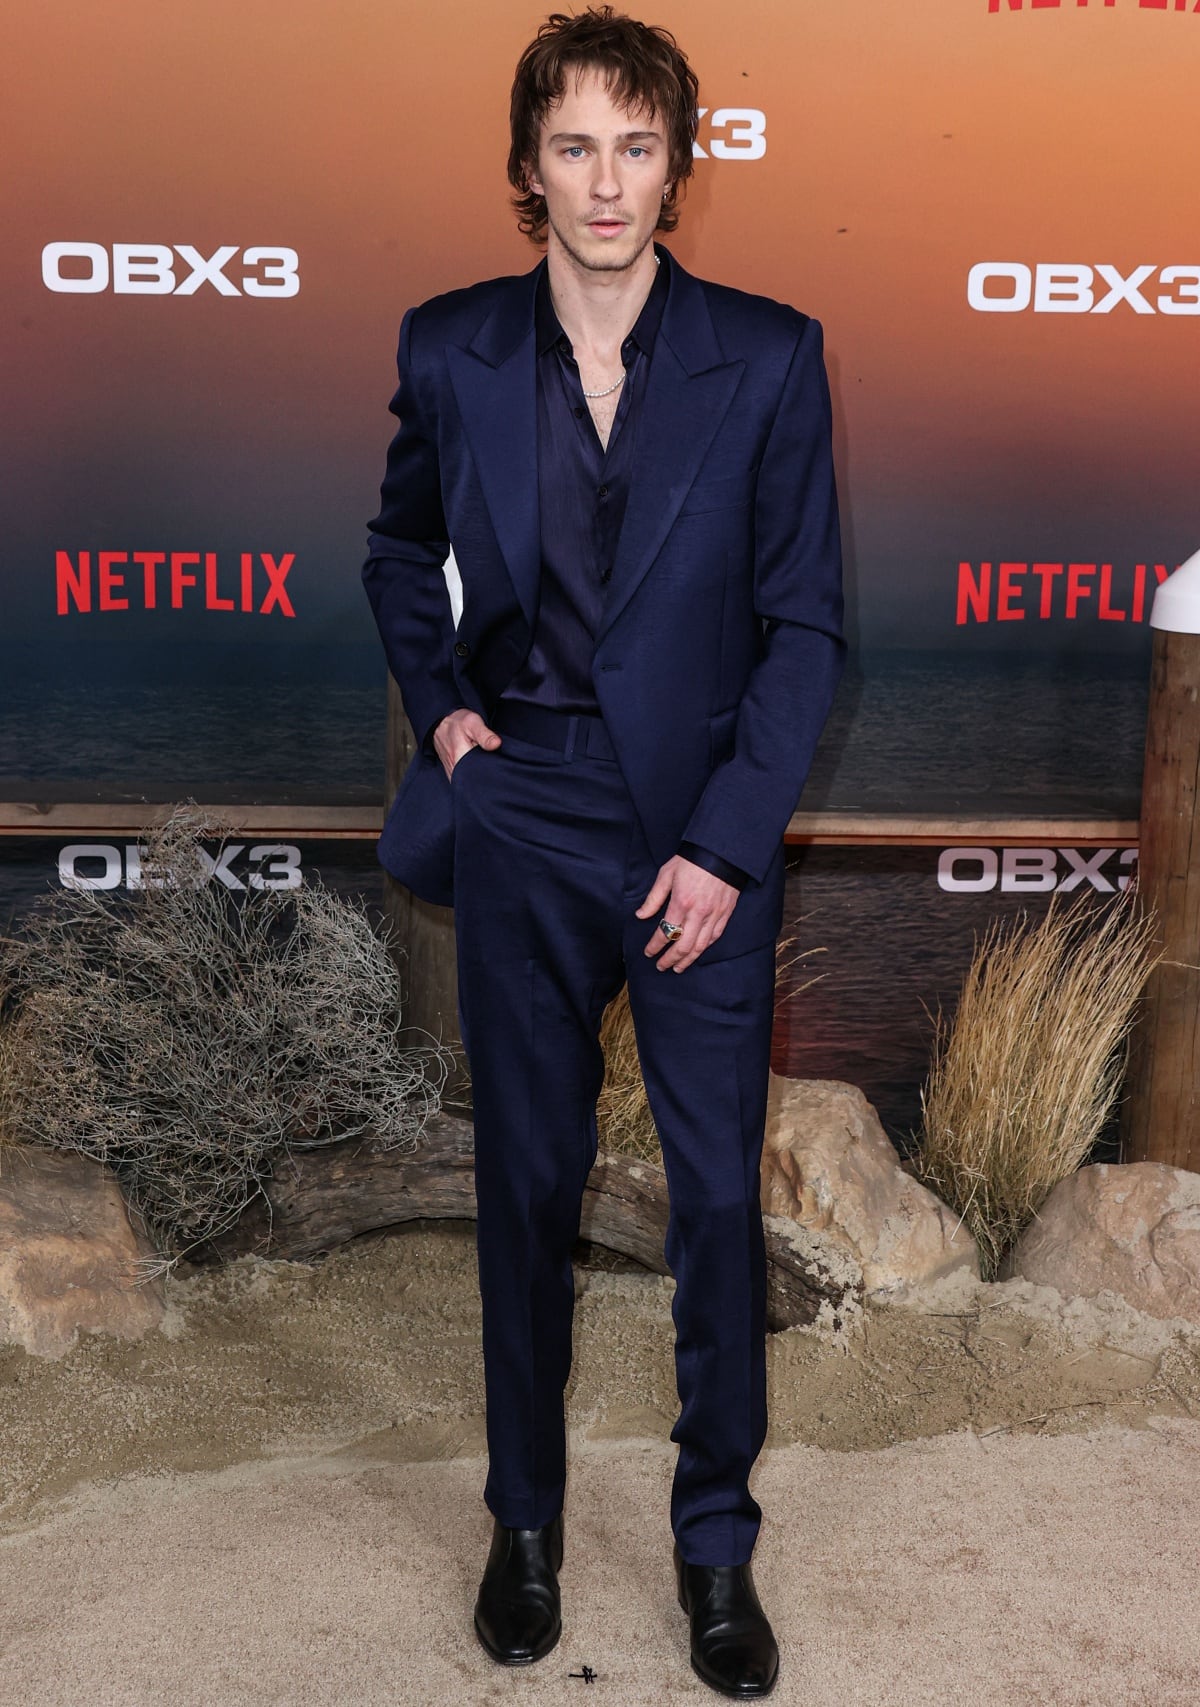 Drew Starkey donned a navy suit at the premiere of Netflix’s Outer Banks Season 3